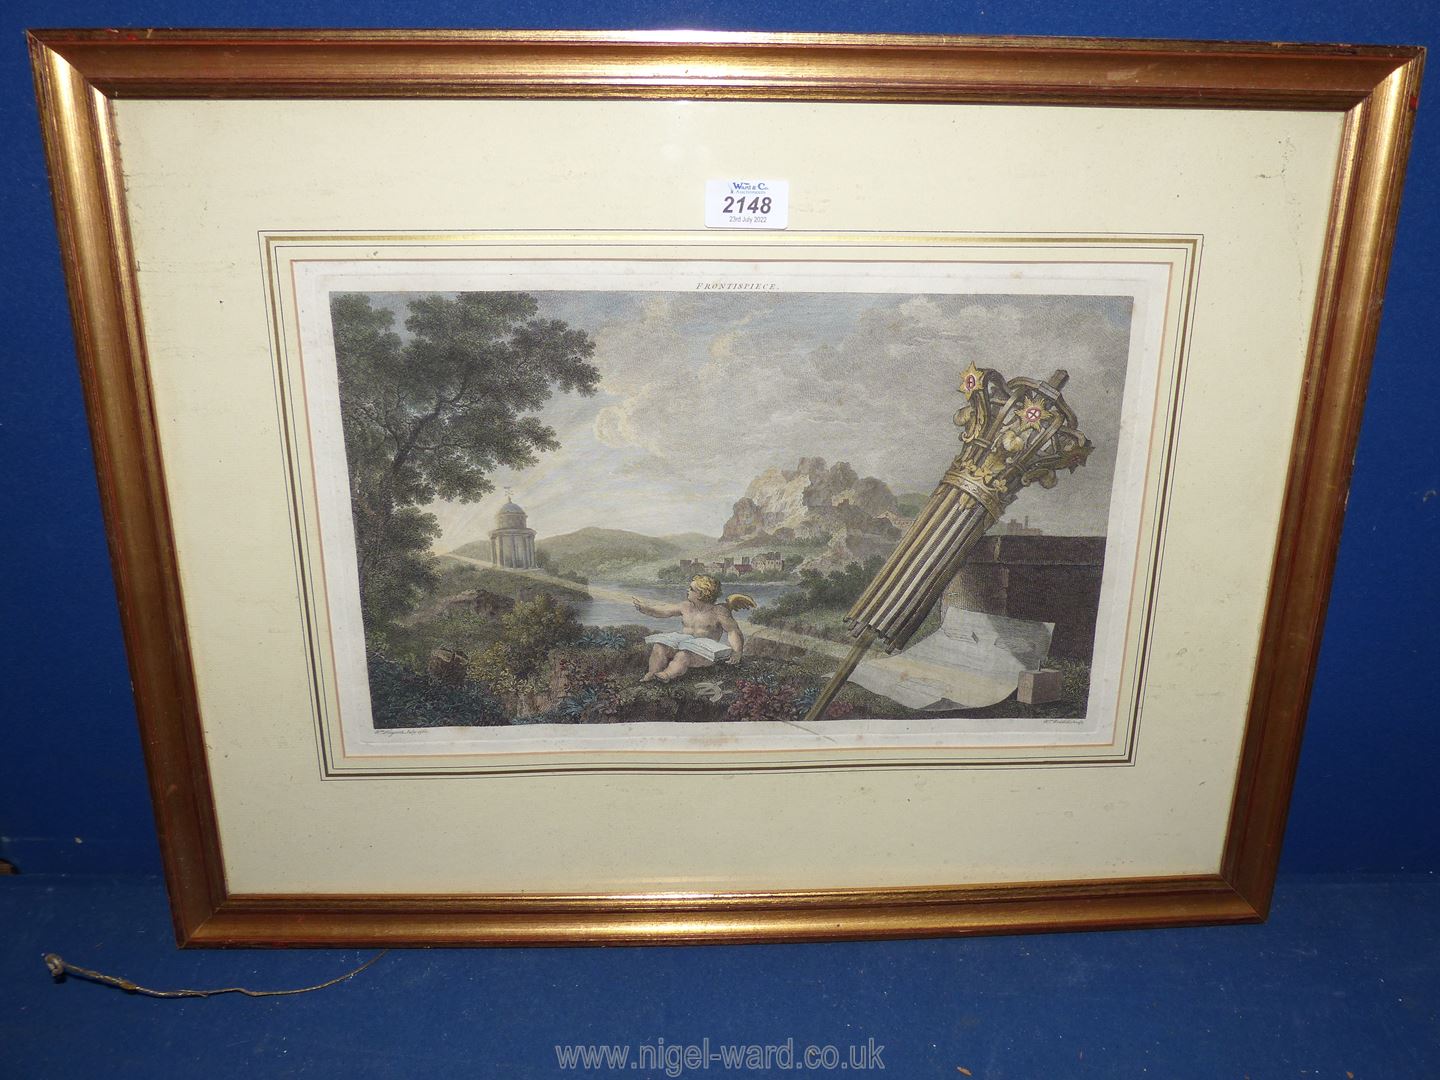 A framed and mounted coloured Etching titled 'Frontispiece' by W. Hogarth, 24" x 18 1/4". - Image 2 of 2